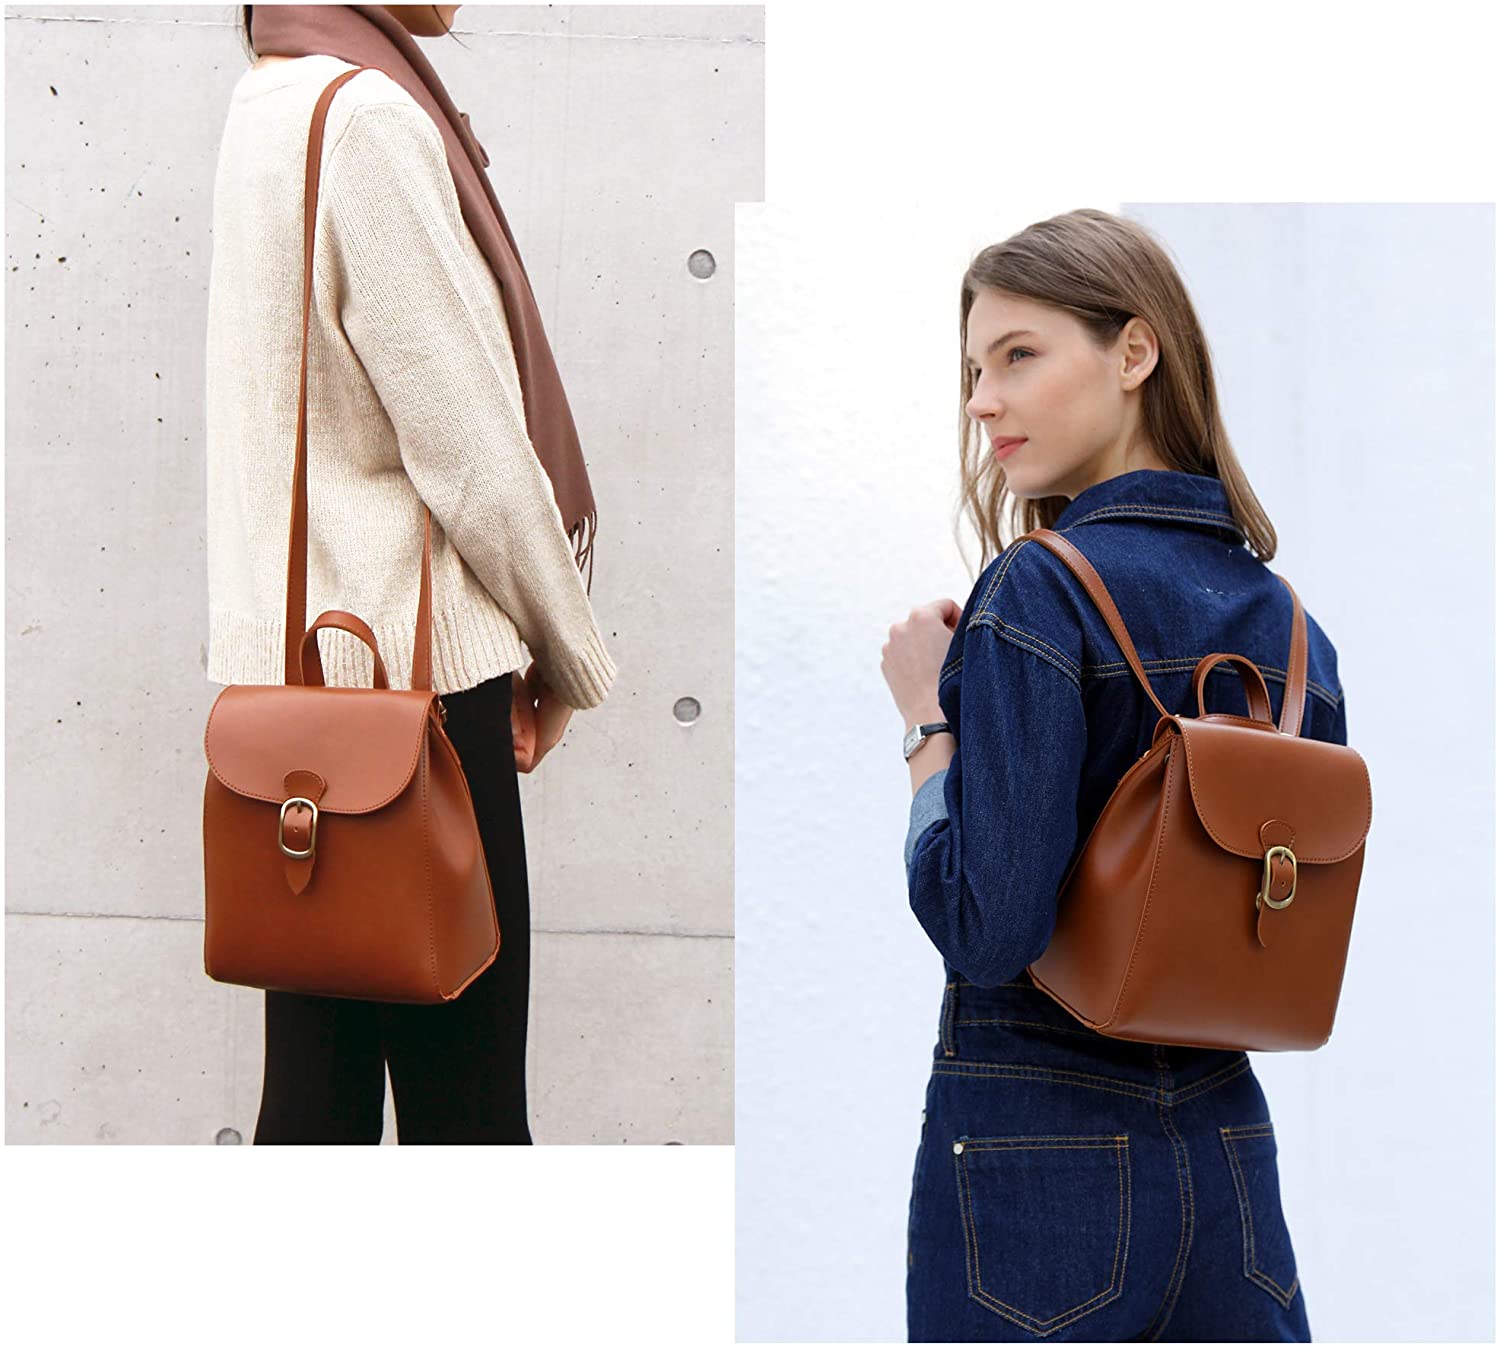 Top 10 Trendy Women's Backpacks for Work That Look Stylish